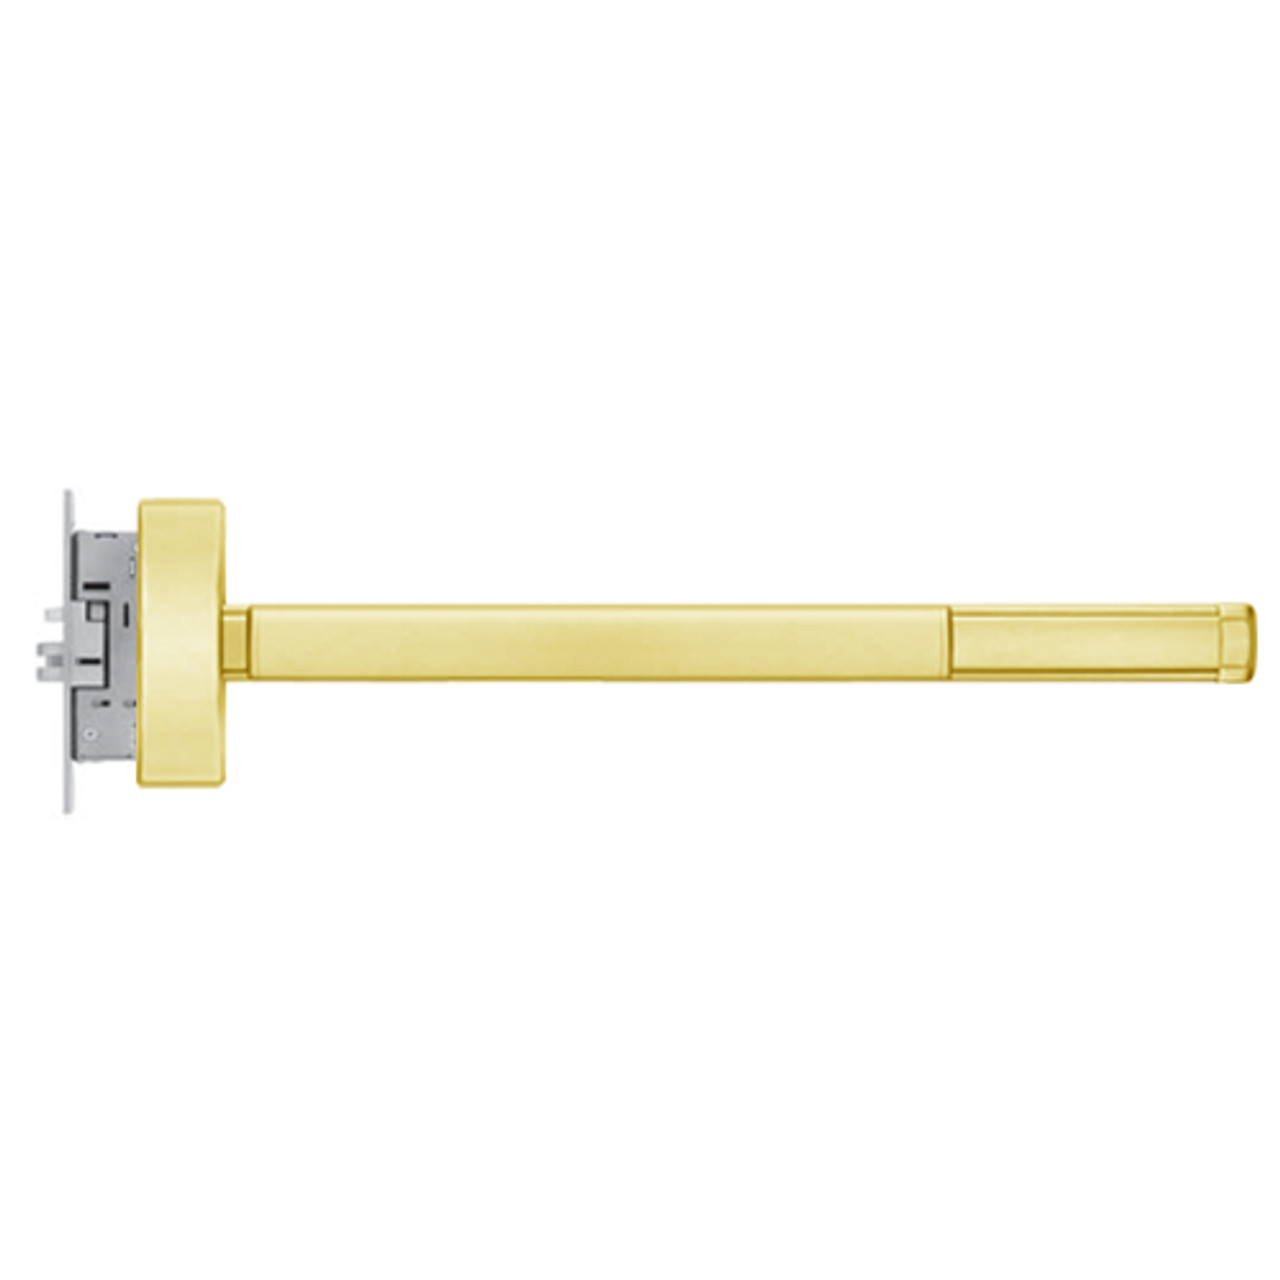 MLR2303-LHR-605-36 PHI 2300 Series Apex Mortise Exit Device with Motorized Latch Retraction Prepped for Key Retracts Latchbolt in Bright Brass Finish